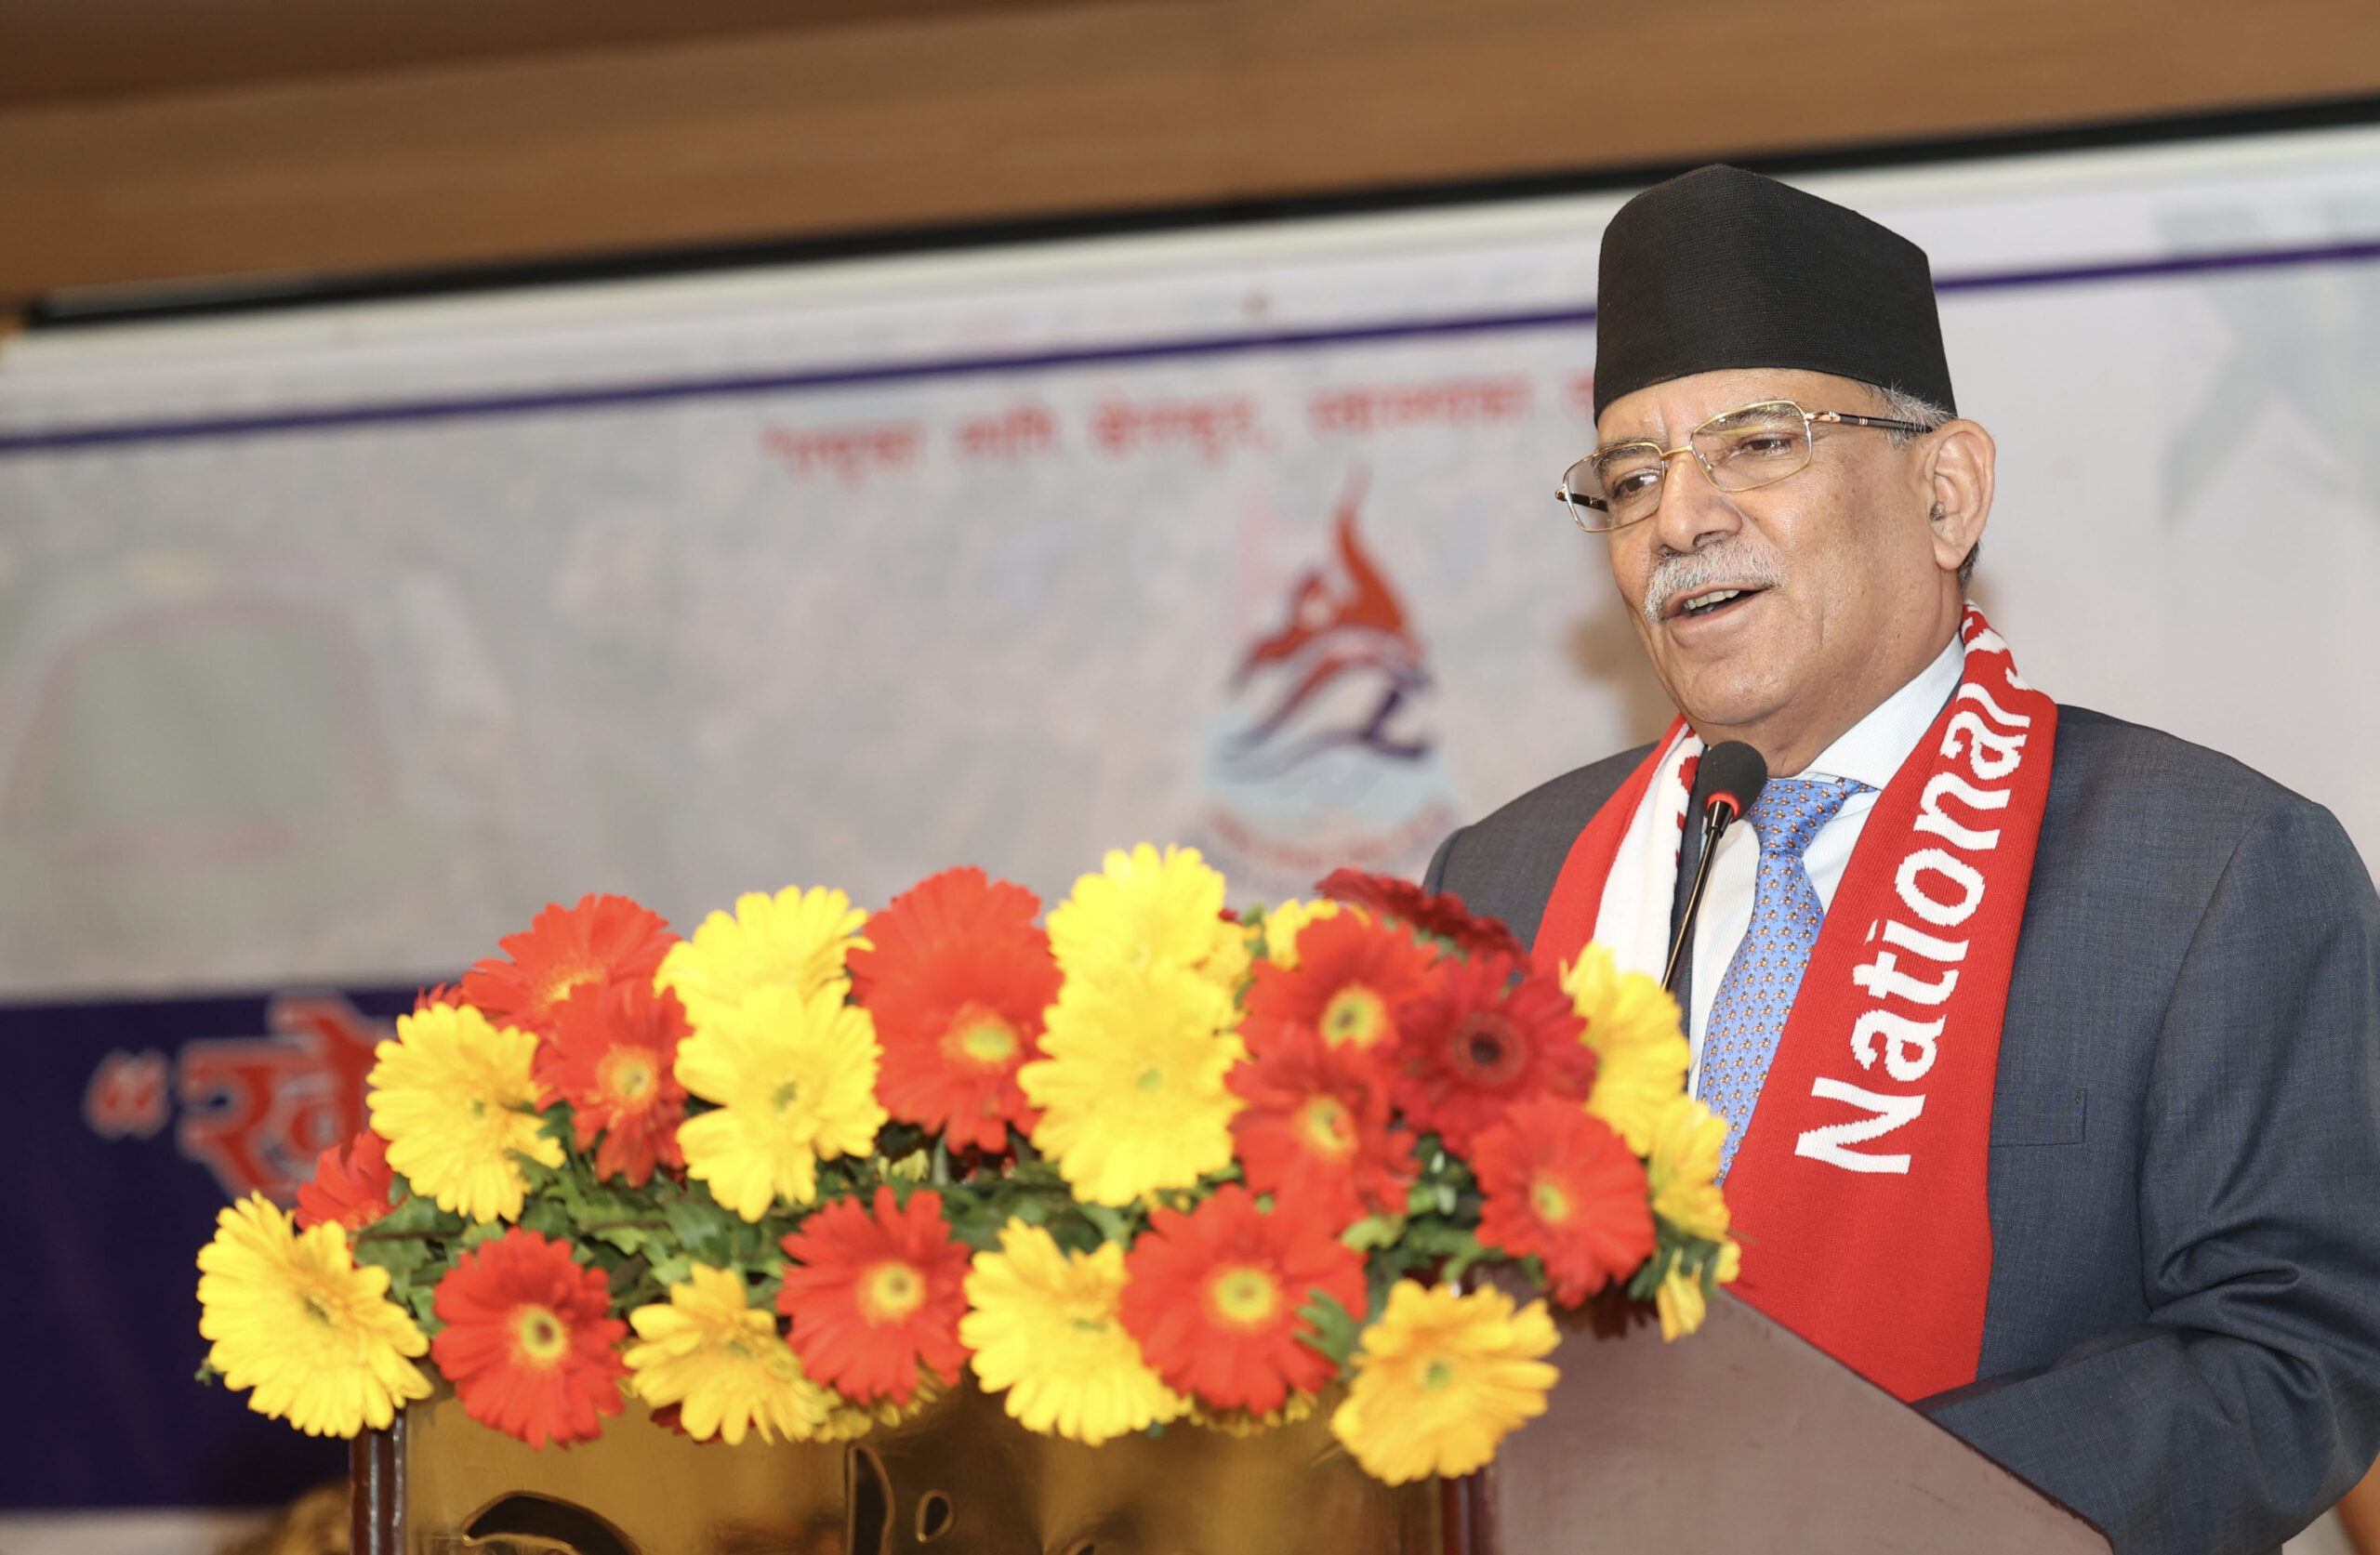 Nepal has potential to be developed as world’s sports hub: PM Dahal